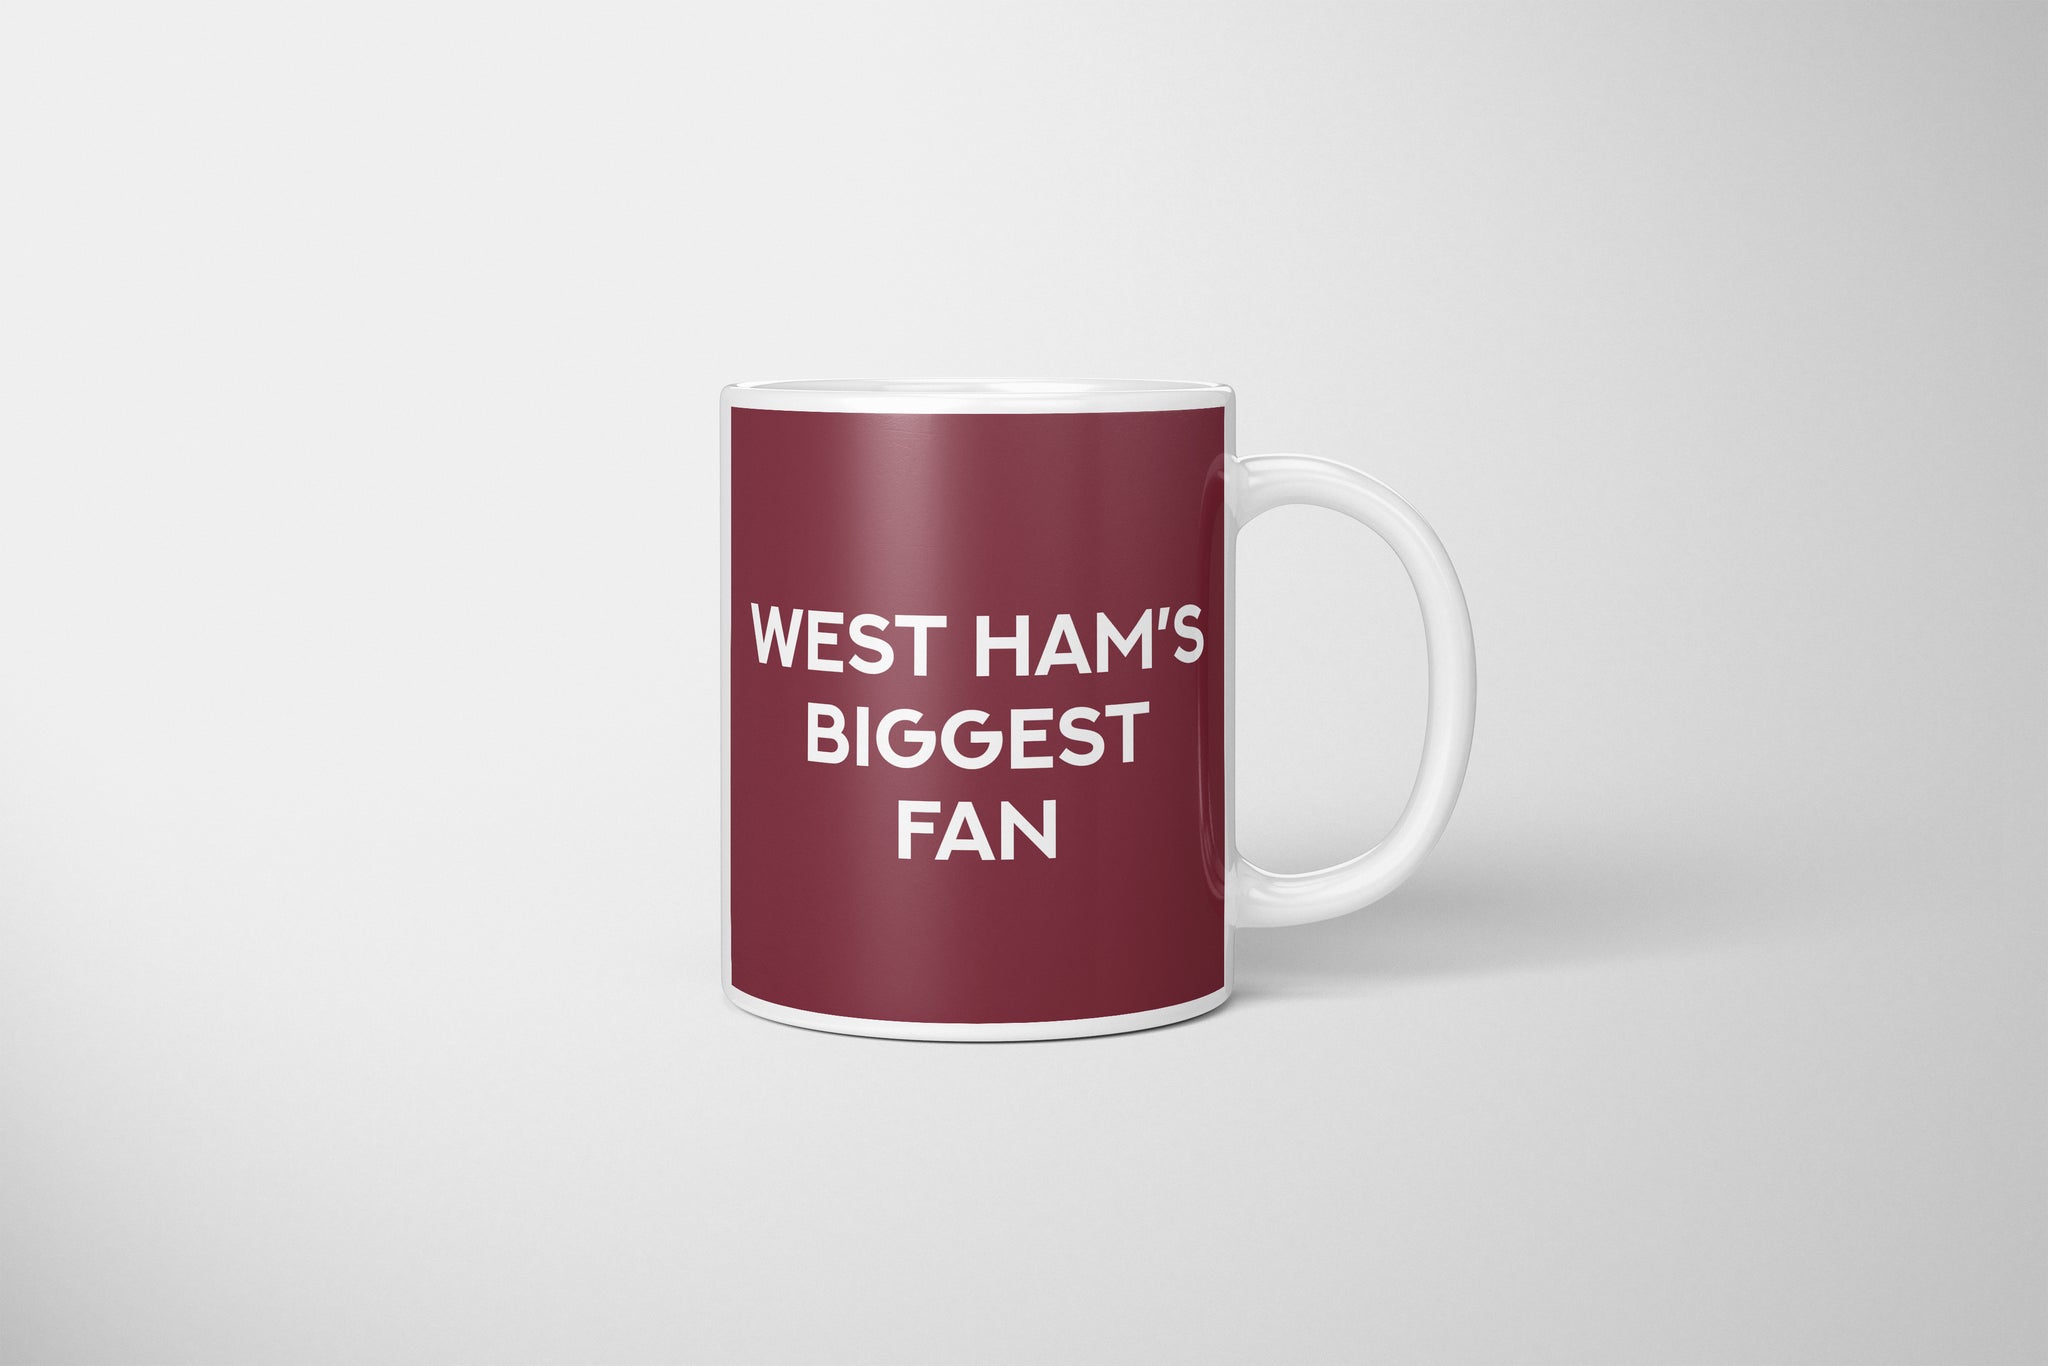 West Ham Fan Mug, West Ham Fan Mug, West Ham FC Mug, West Ham Football Fan Gift, West Ham Swear Mug, Gift For West Ham Fan, The Hammers Mug, Perfect Mug For West Ham Fan, West Ham Present, West Ham Football Fan Present